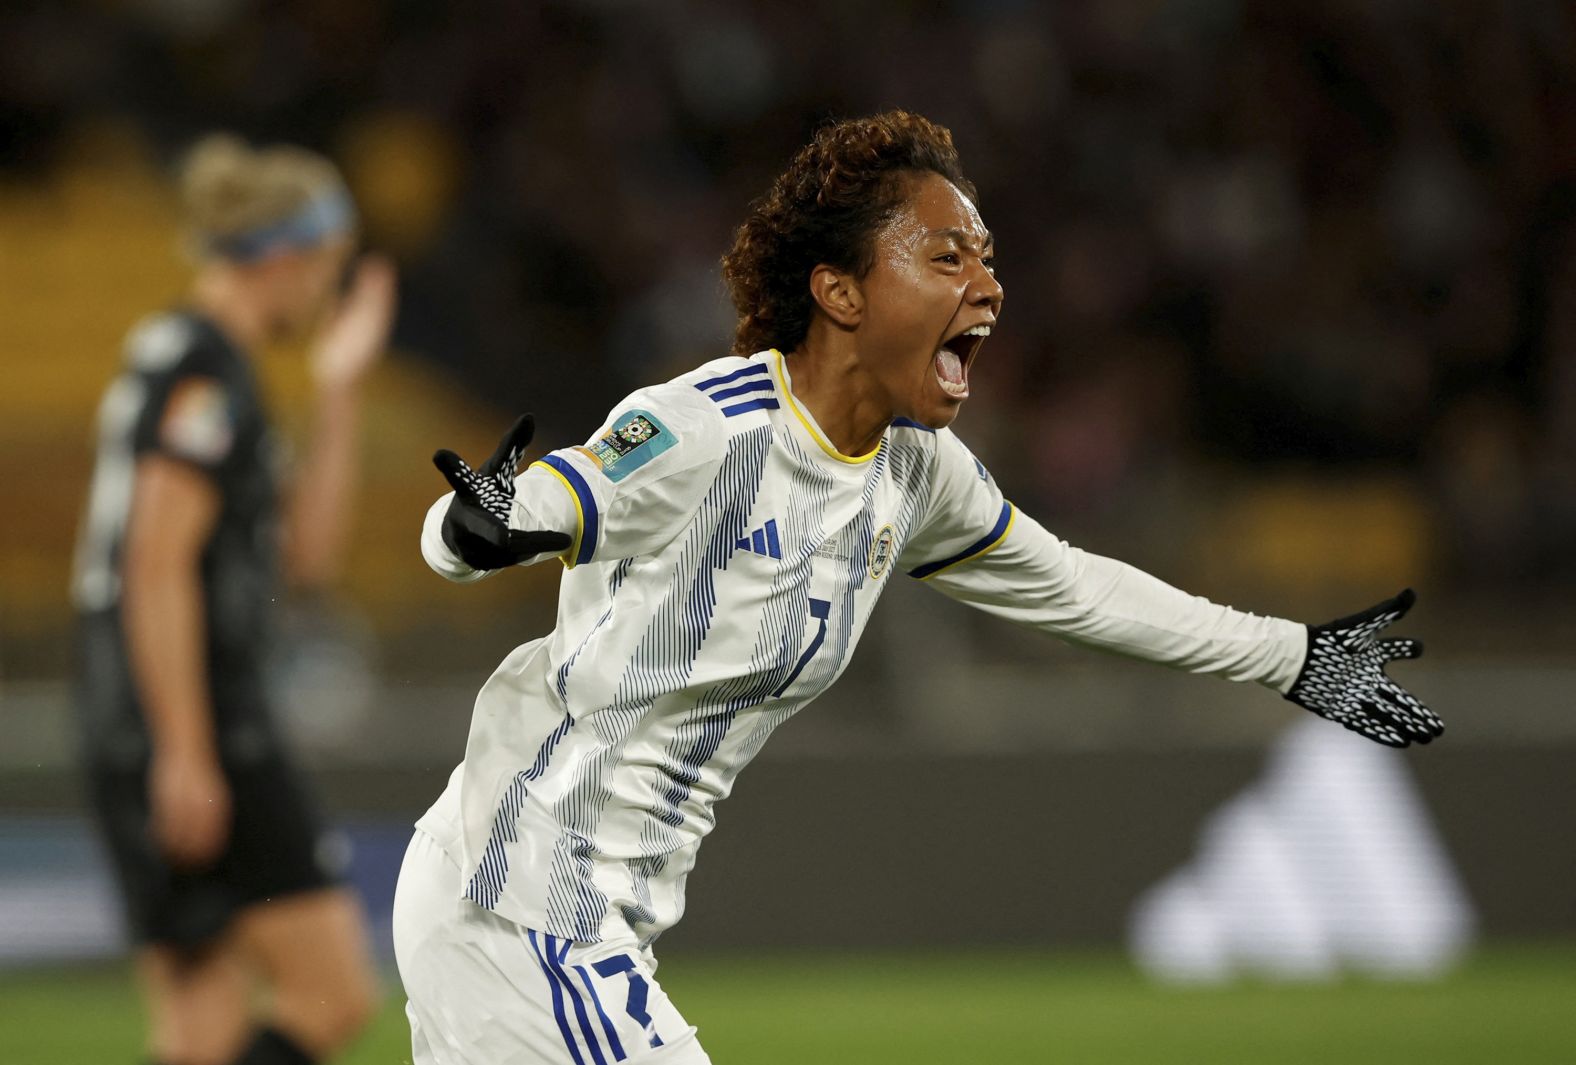 Philippines midfielder Sarina Bolden celebrates scoring against New Zealand on July 25. Bolden's first-half header <a href="index.php?page=&url=https%3A%2F%2Fedition.cnn.com%2F2023%2F07%2F24%2Ffootball%2Fnew-zealand-switzerland-norway-womens-world-cup-2023-spt-intl%2Findex.html" target="_blank">lifted her country to a 1-0 victory</a> — its first win ever at a Women's World Cup.